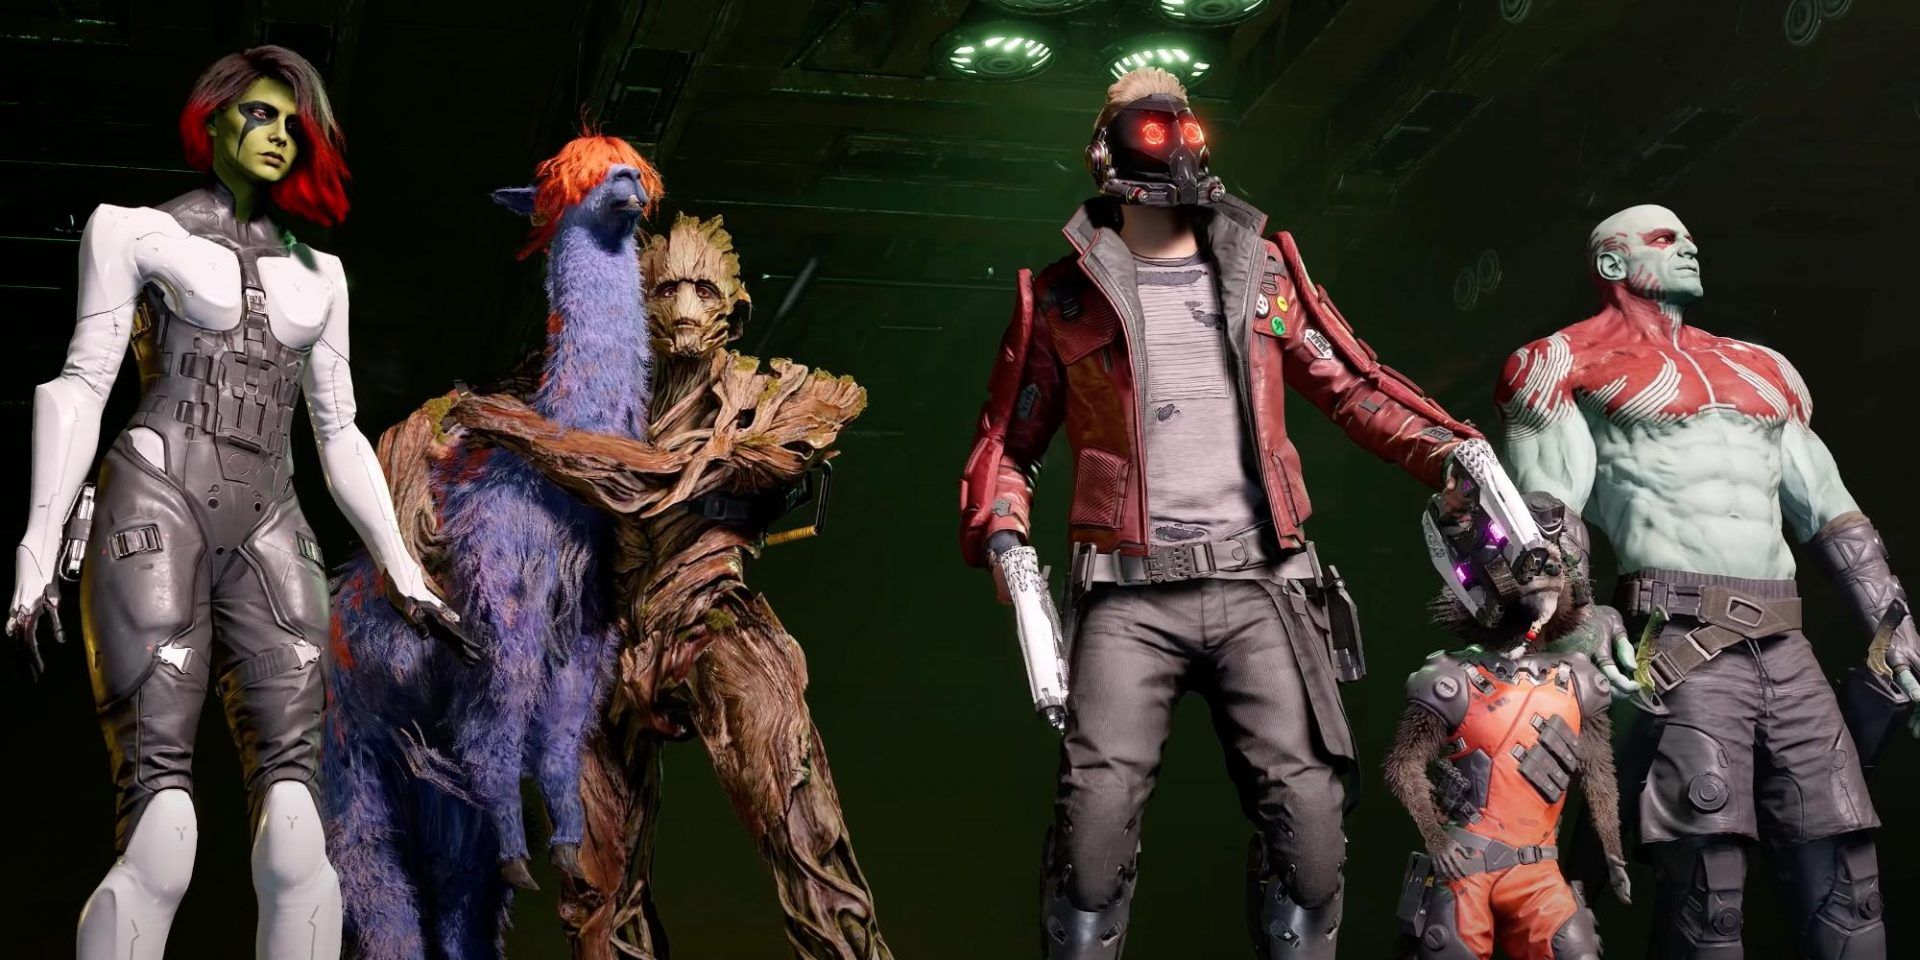 Guardians of the Galaxy Team Standing Together